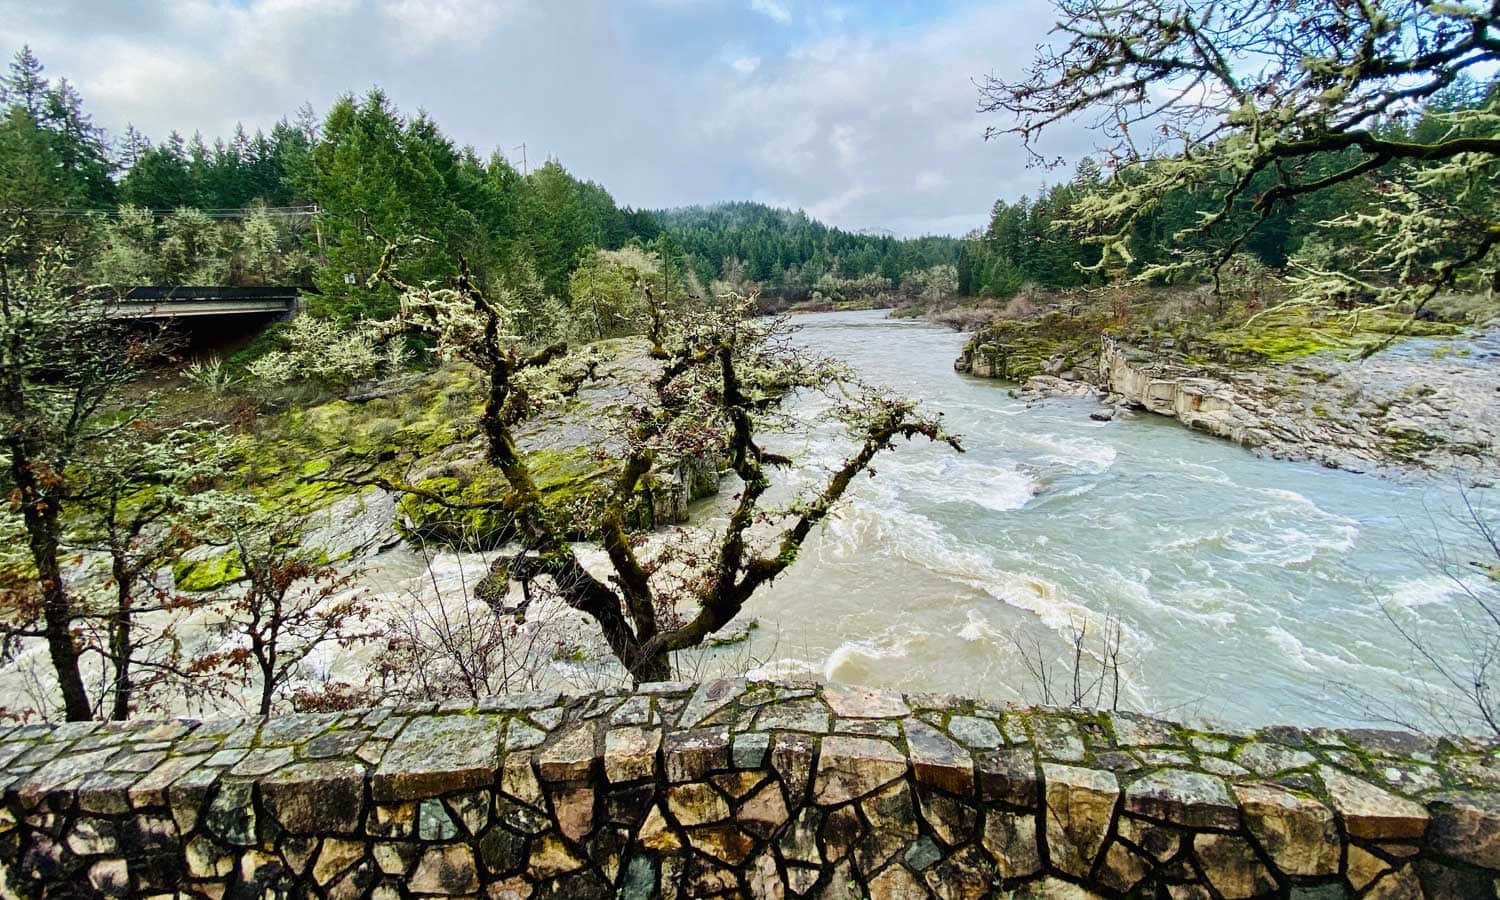 A rock barrier separates the viewpoint to the colliding rivers below.